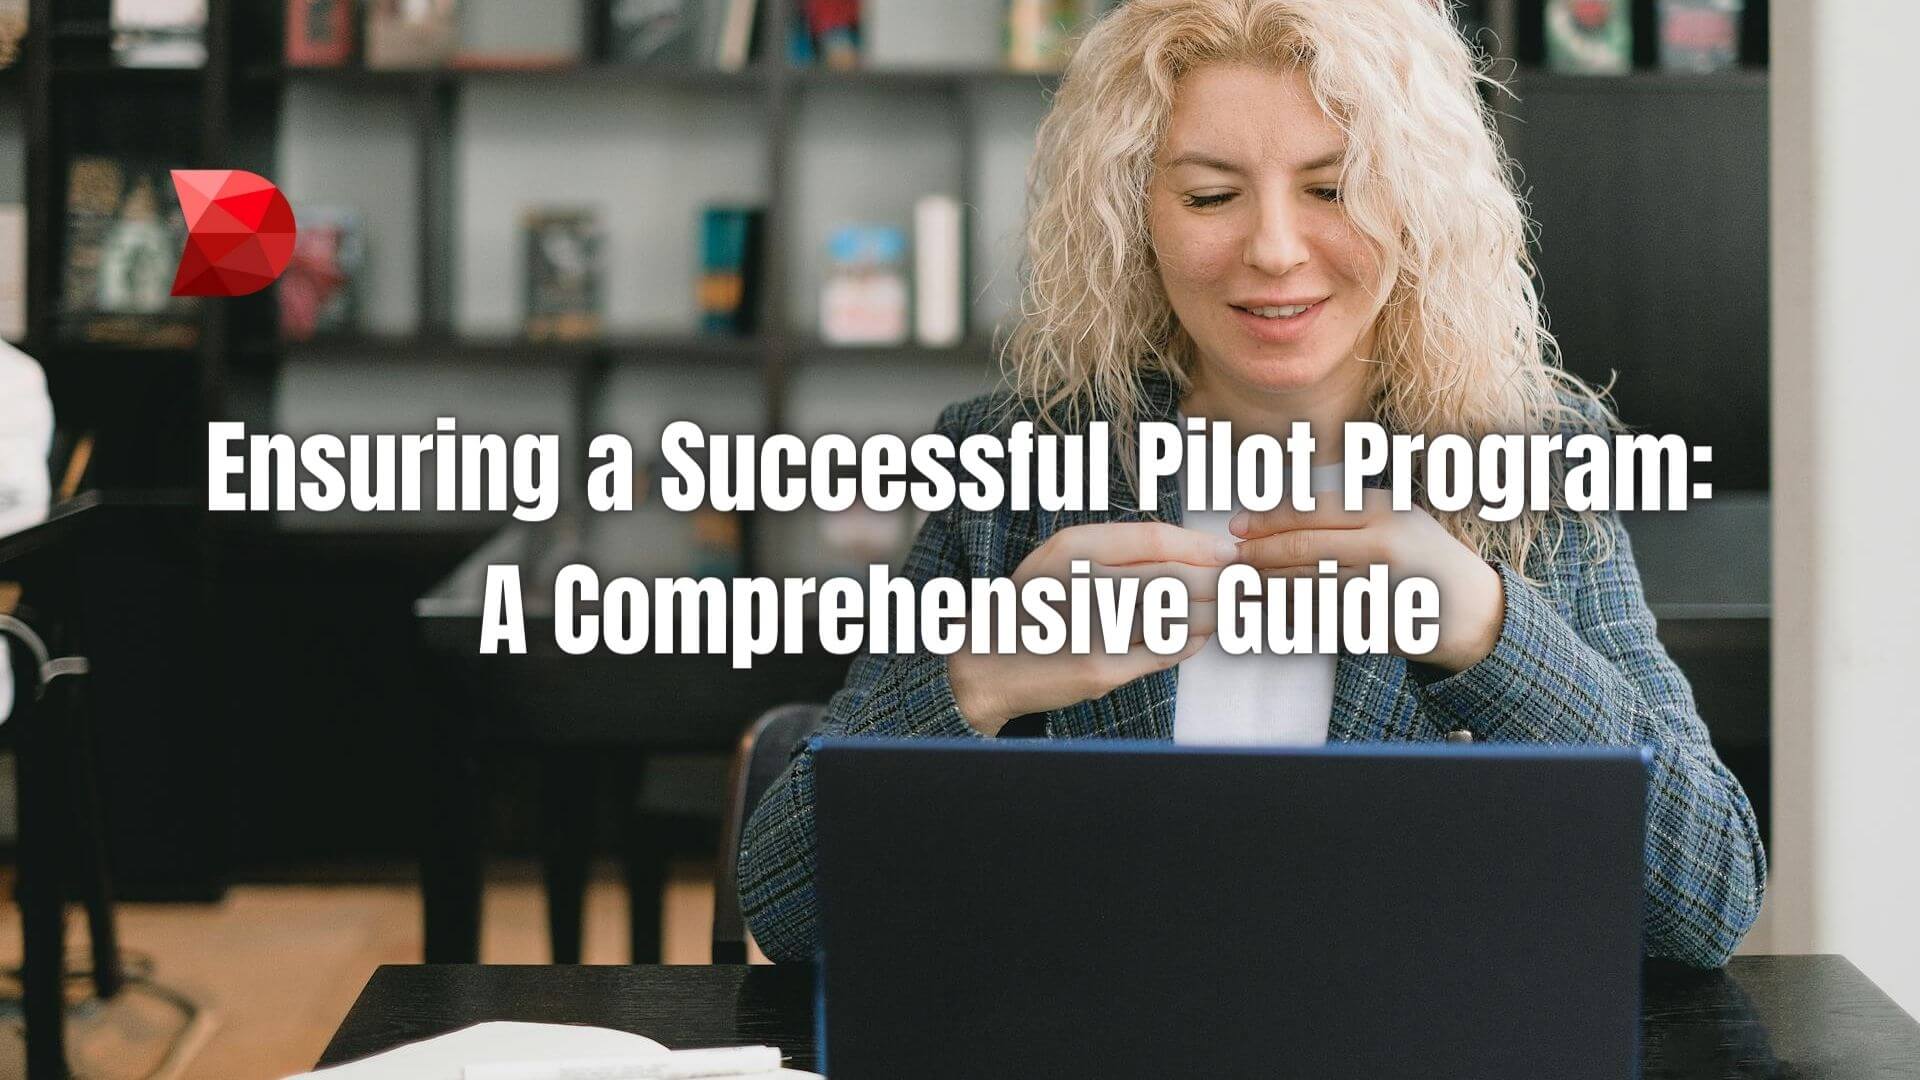 Maximize success and minimize risk! Discover expert strategies for launching a flawless pilot program with our comprehensive guide.